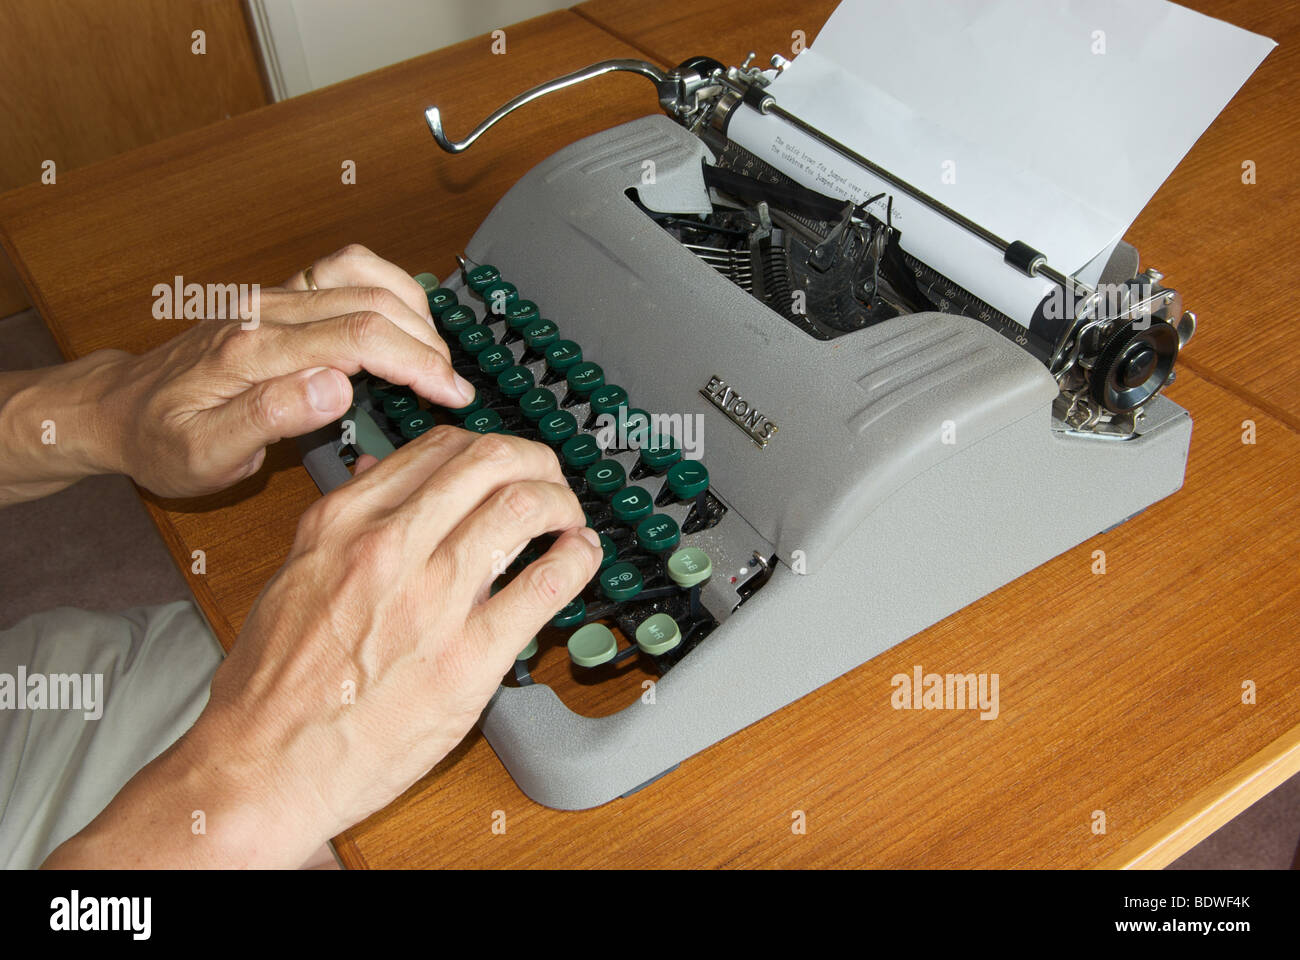 Outdated technology manual portable typewriter fingers typing on keyboard to mechanically activate letter strikes onto paper Stock Photo